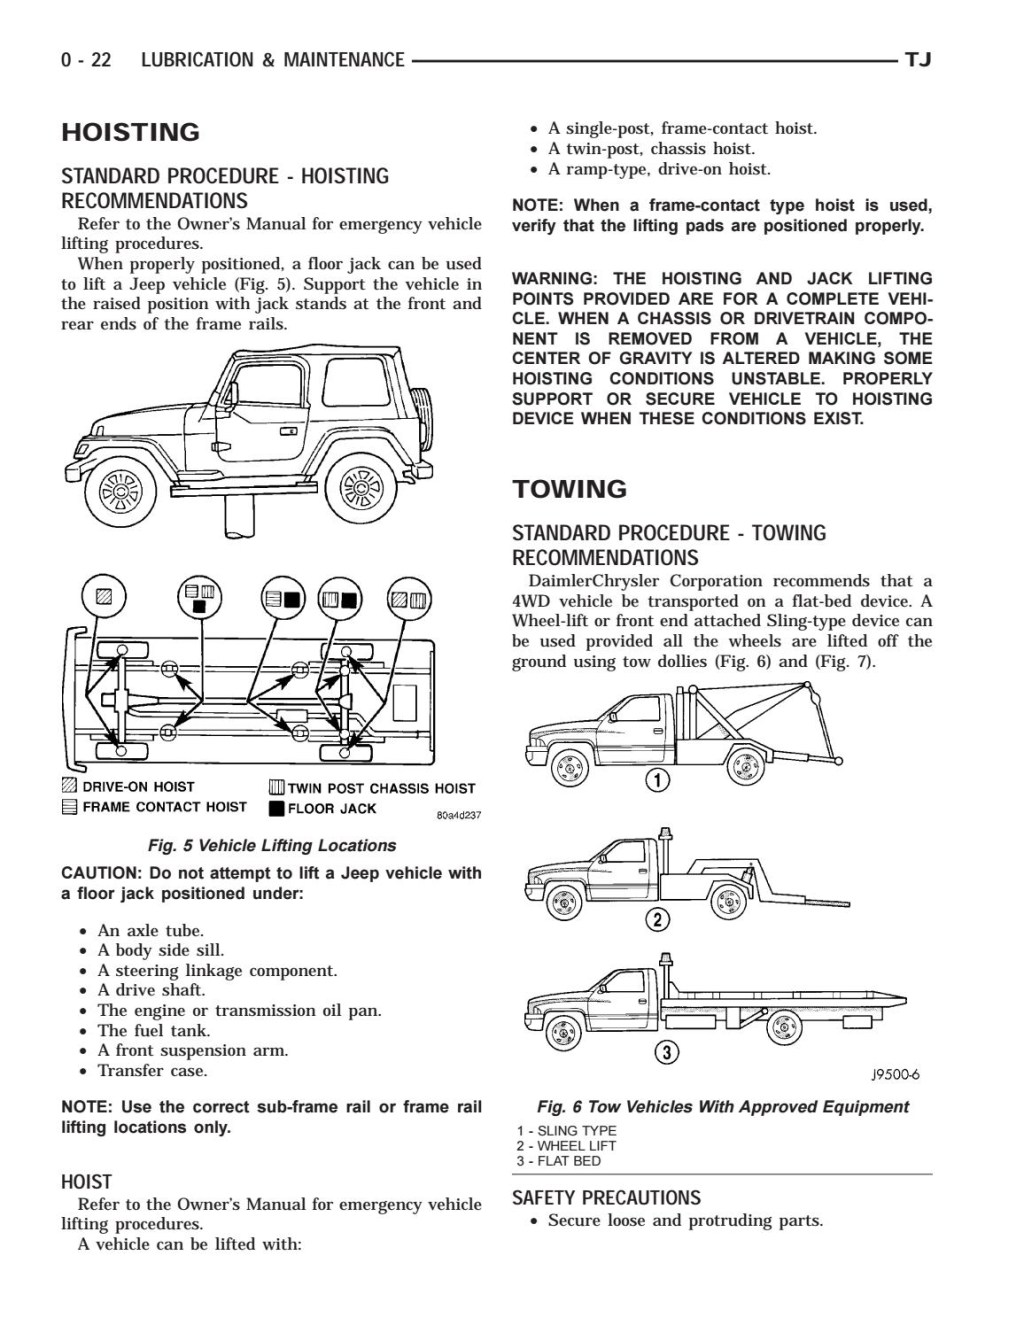 2005 jeep wrangler jl owners manual - JEEP WRANGLER Service Repair Manual by  - Issuu